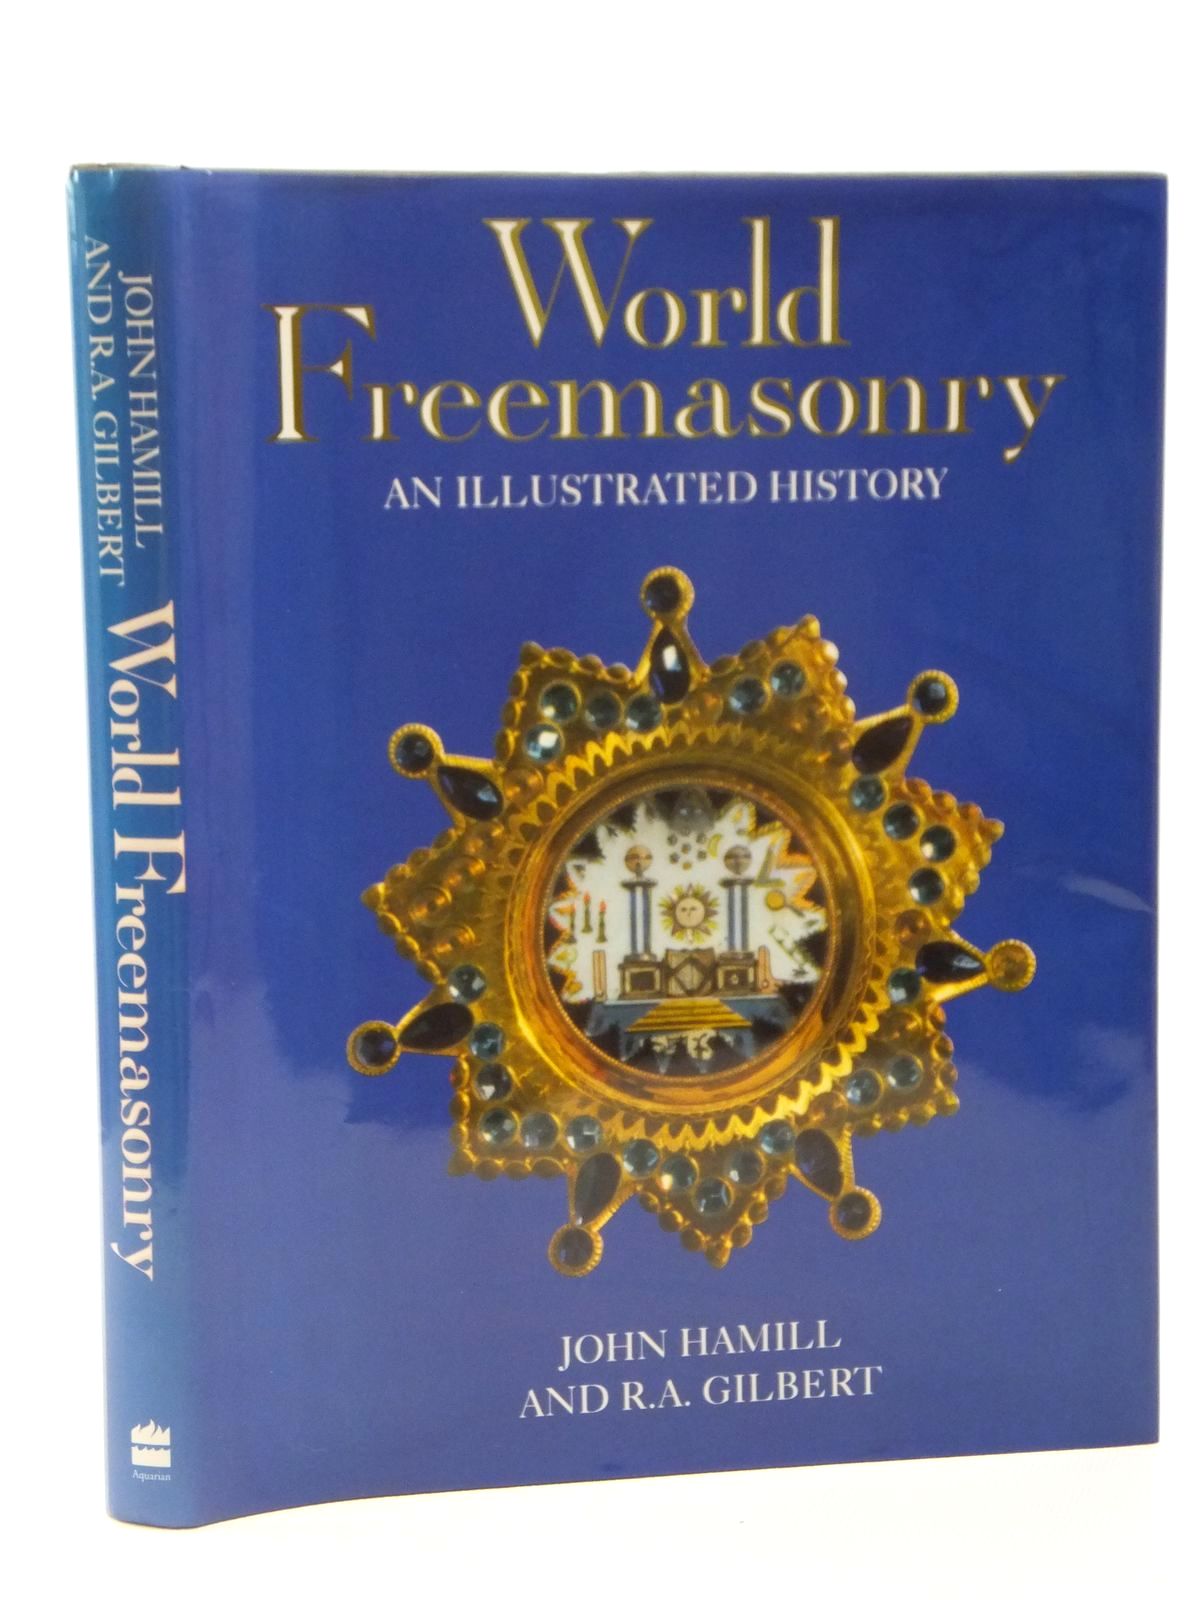 Photo of WORLD FREEMASONRY AN ILLUSTRATED HISTORY written by Hamill, John Gilbert, R.A. published by Aquarian Thorsons (STOCK CODE: 2122280)  for sale by Stella & Rose's Books